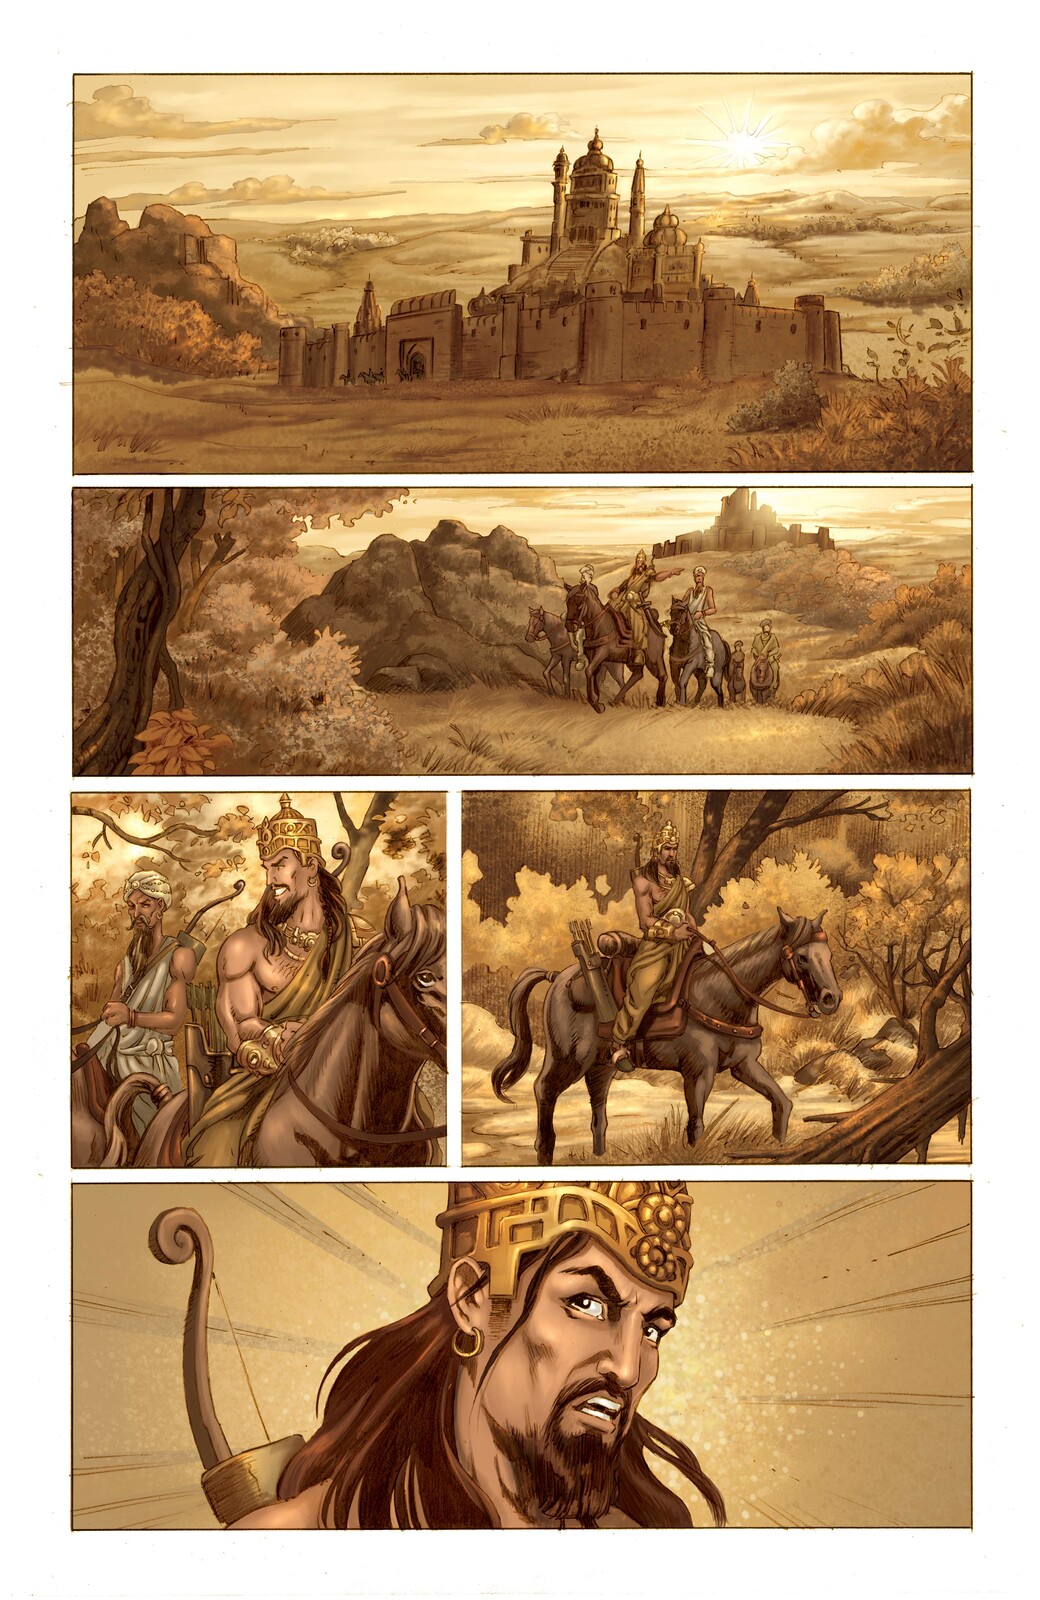 Scions of the Cursed King
Page 11, color by Santosh Pillewar